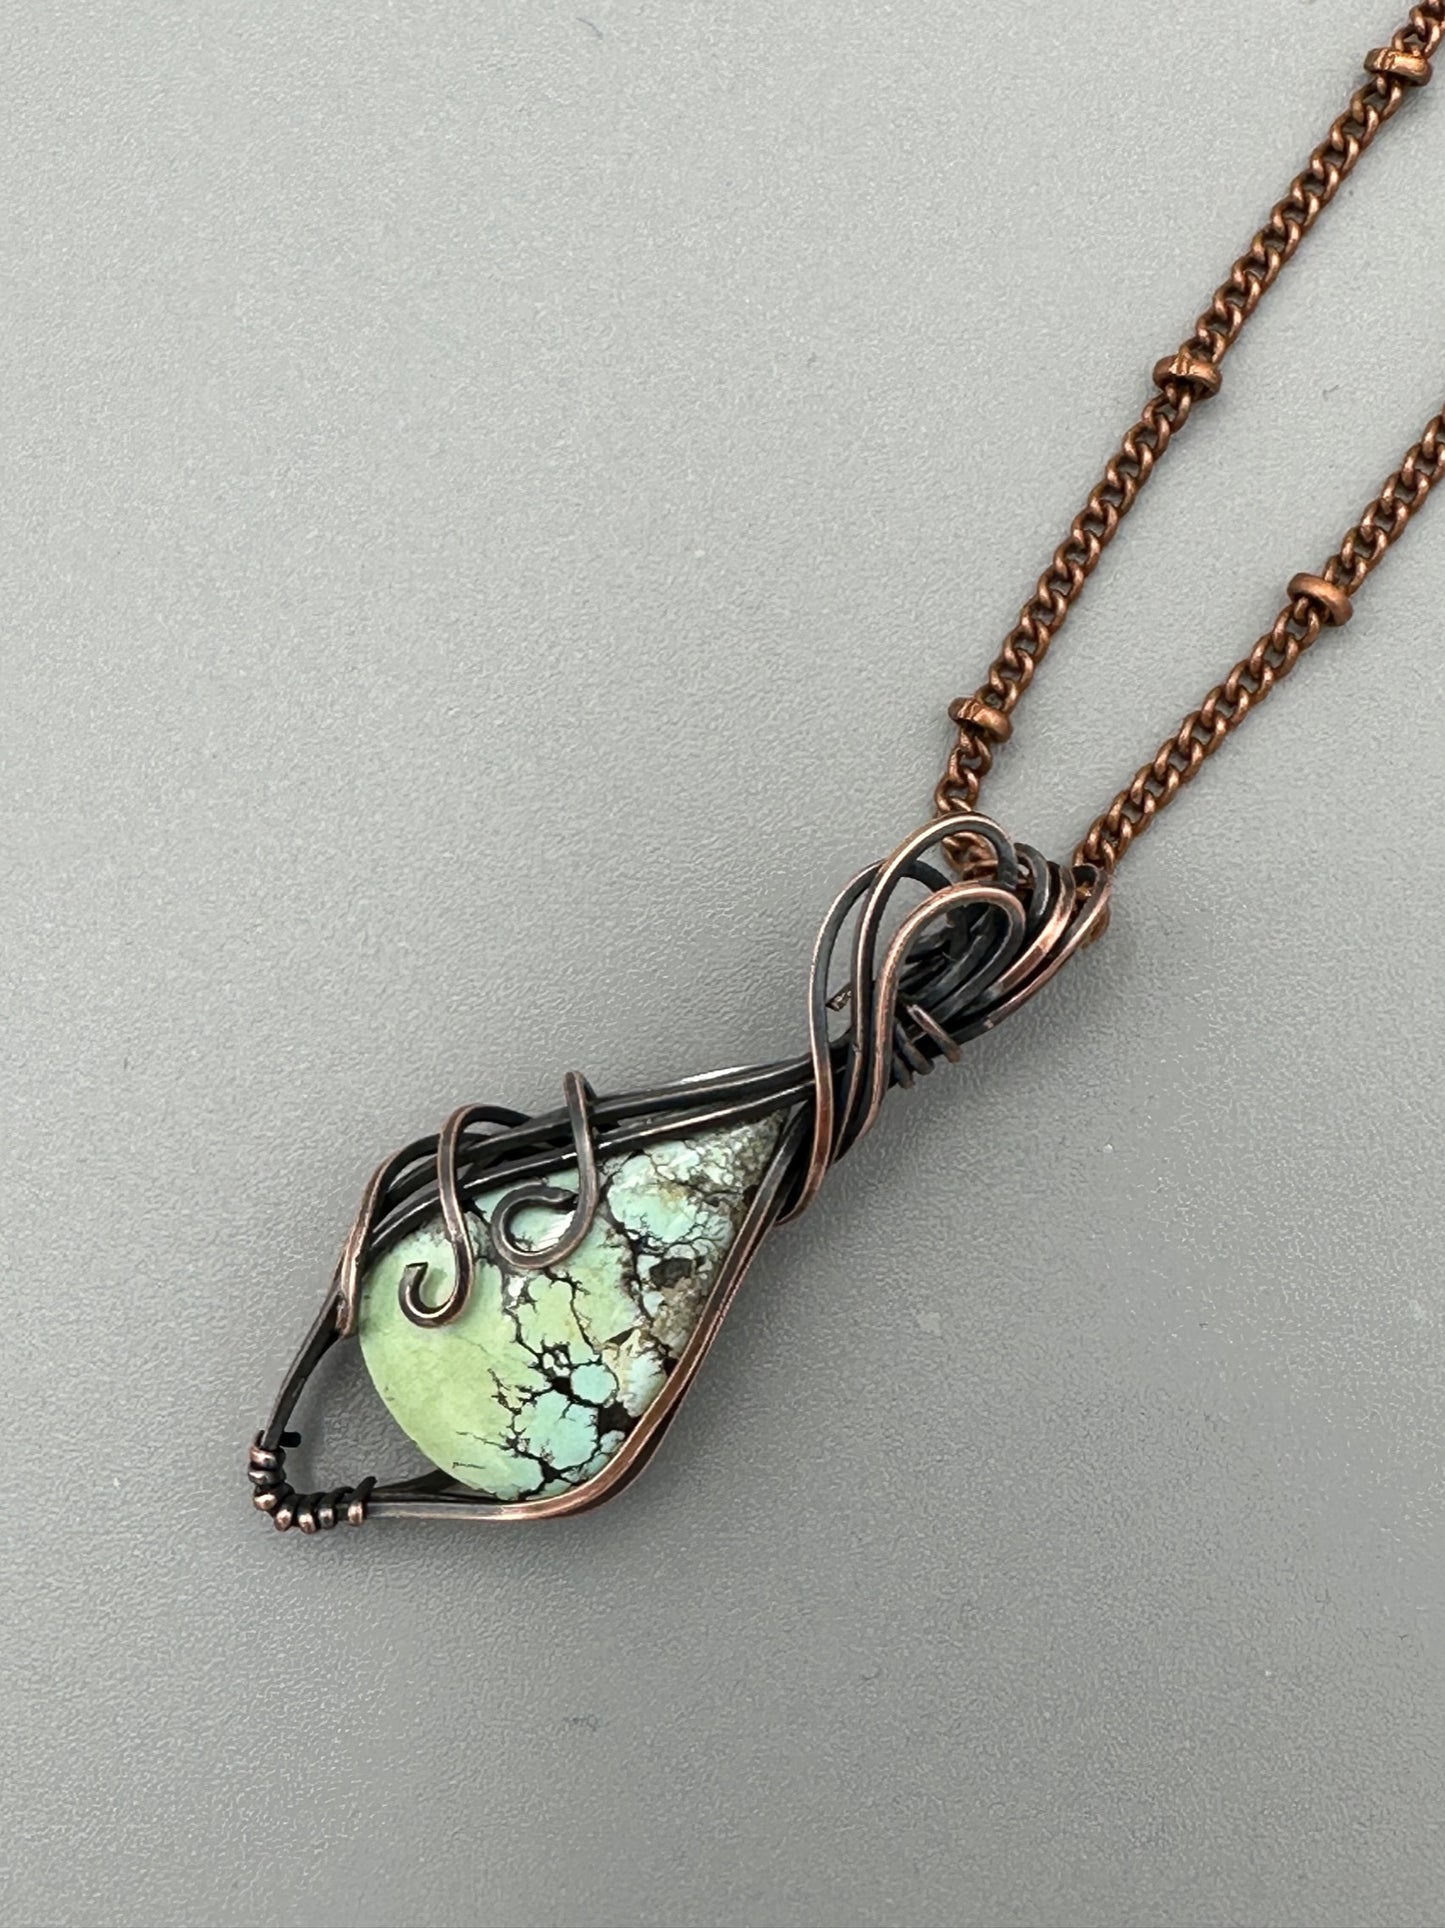 Handmade Wire Wrapped Turquoise Teardrop Pendant